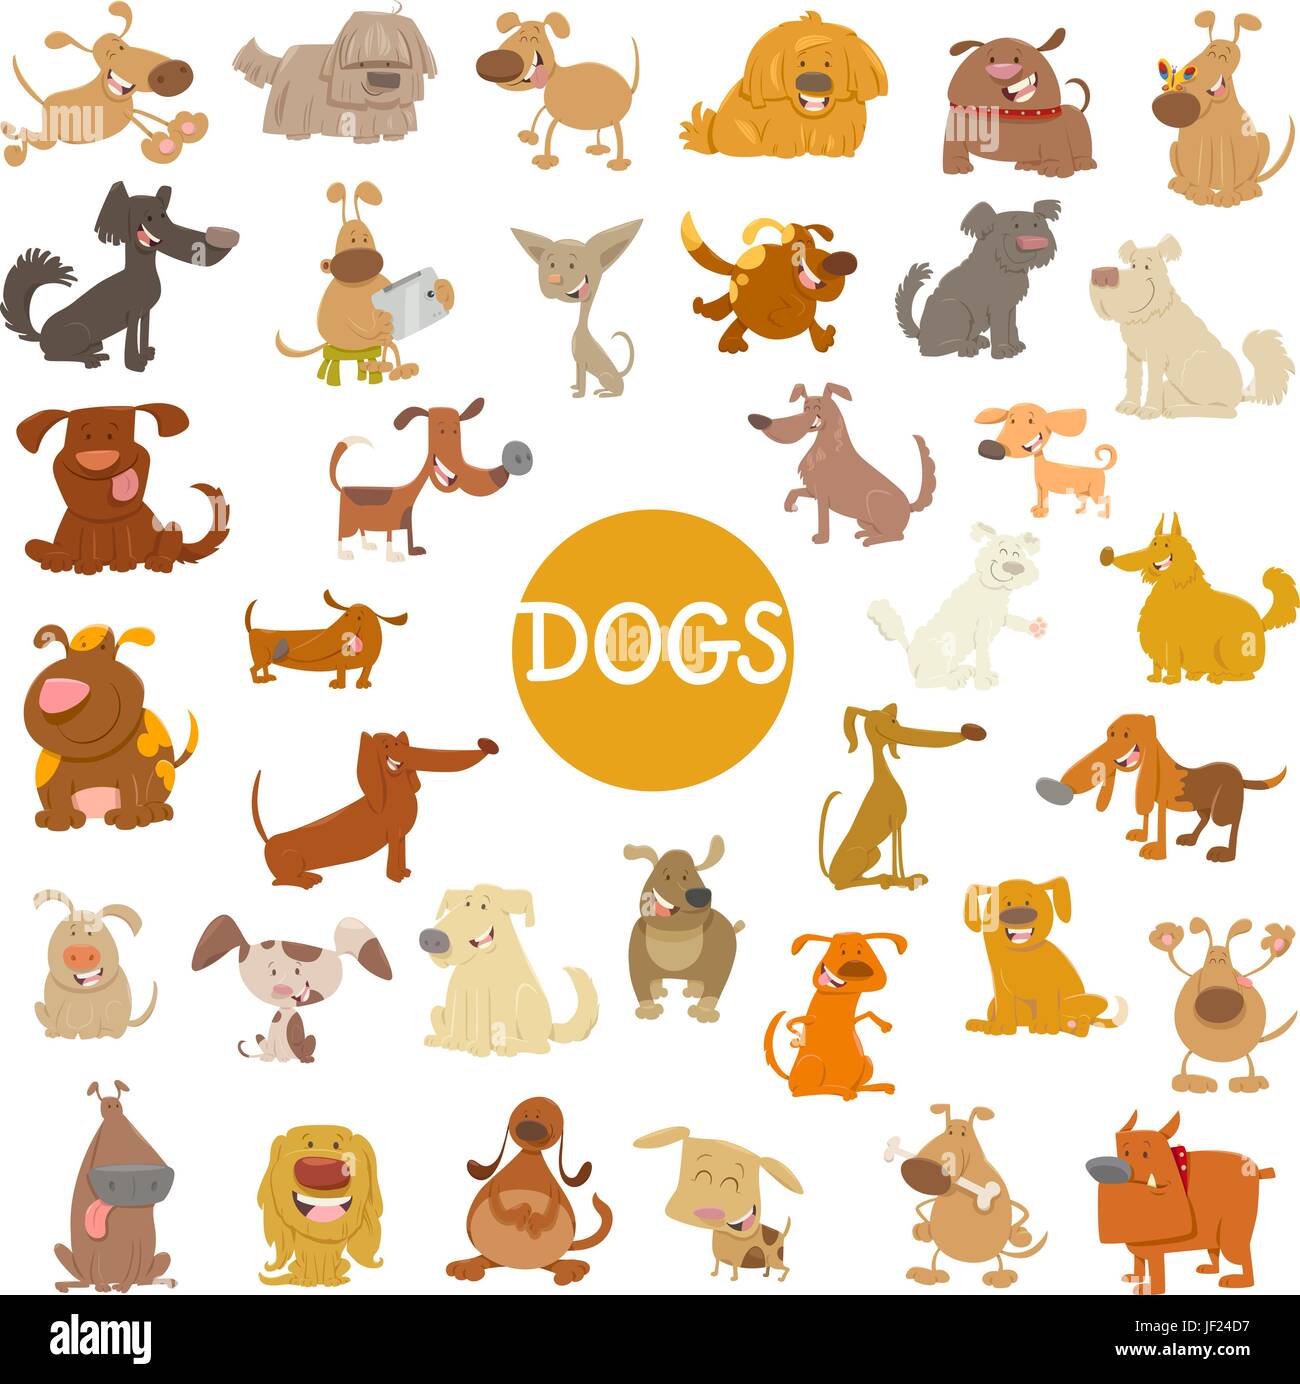 Cartoon Illustration of Funny Dogs Pet Animal Characters Big Set Stock Vector